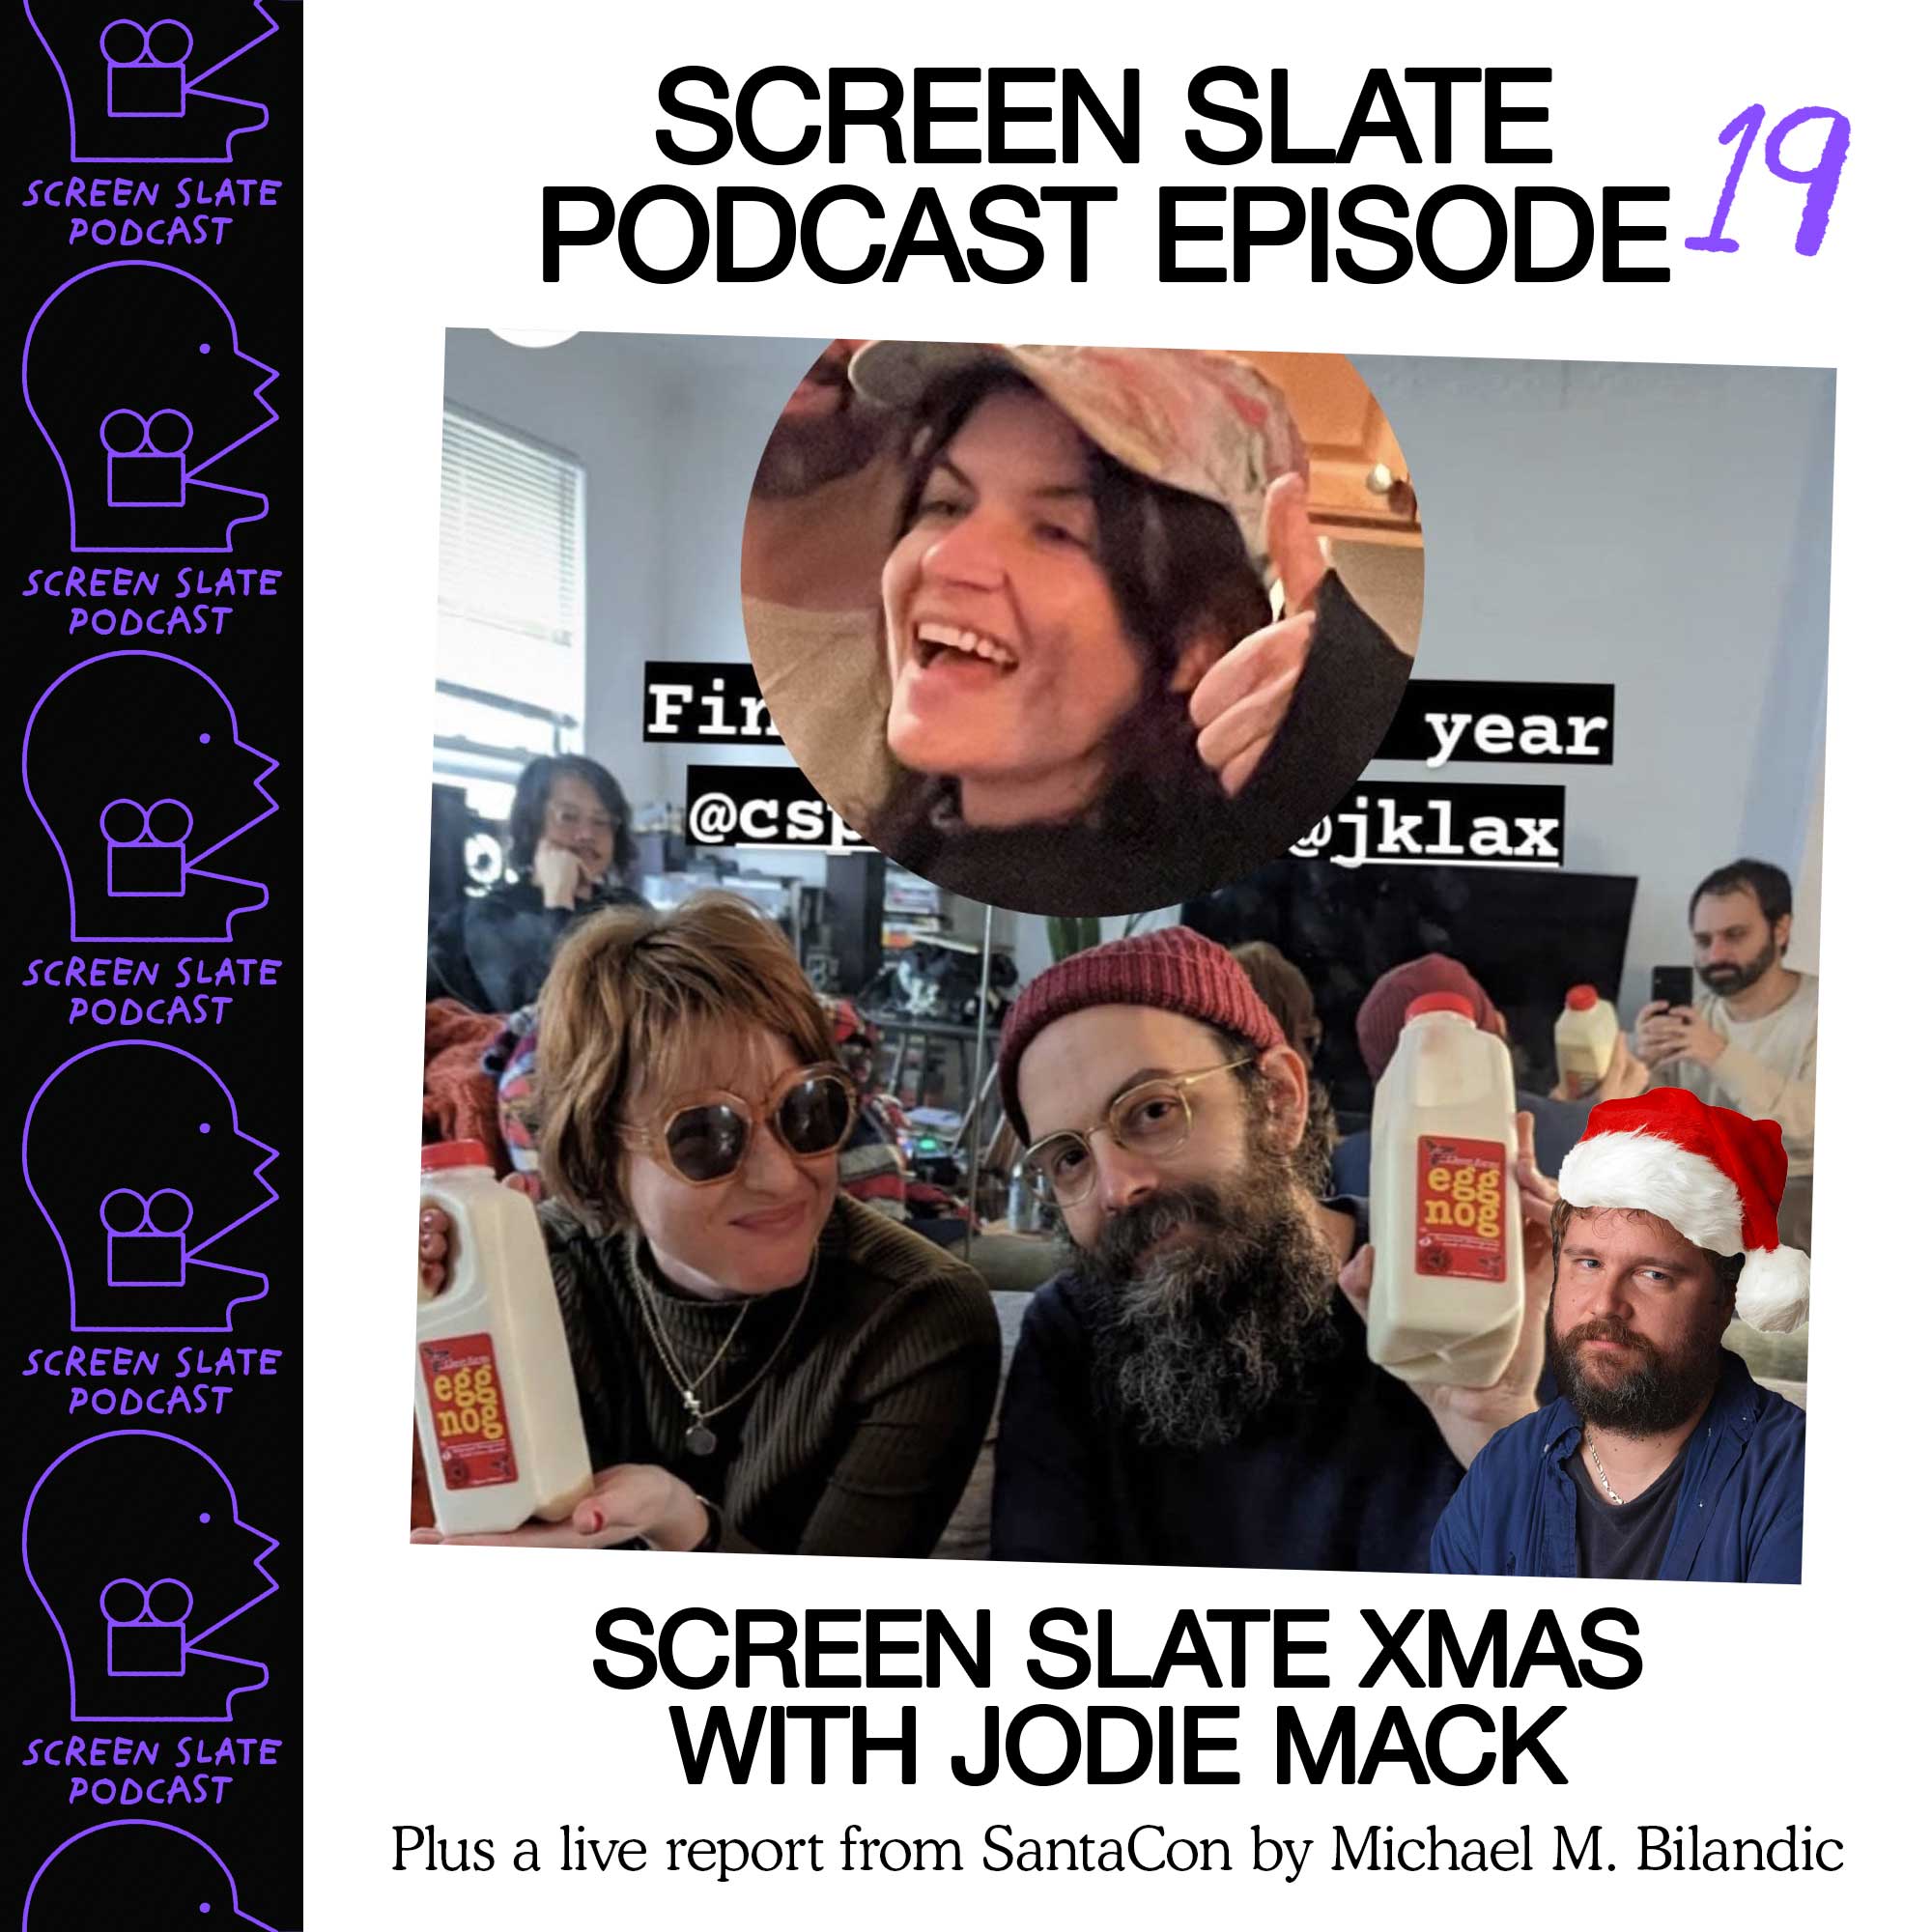 Episode 19 - Screen Slate Xmas with Jodie Mack